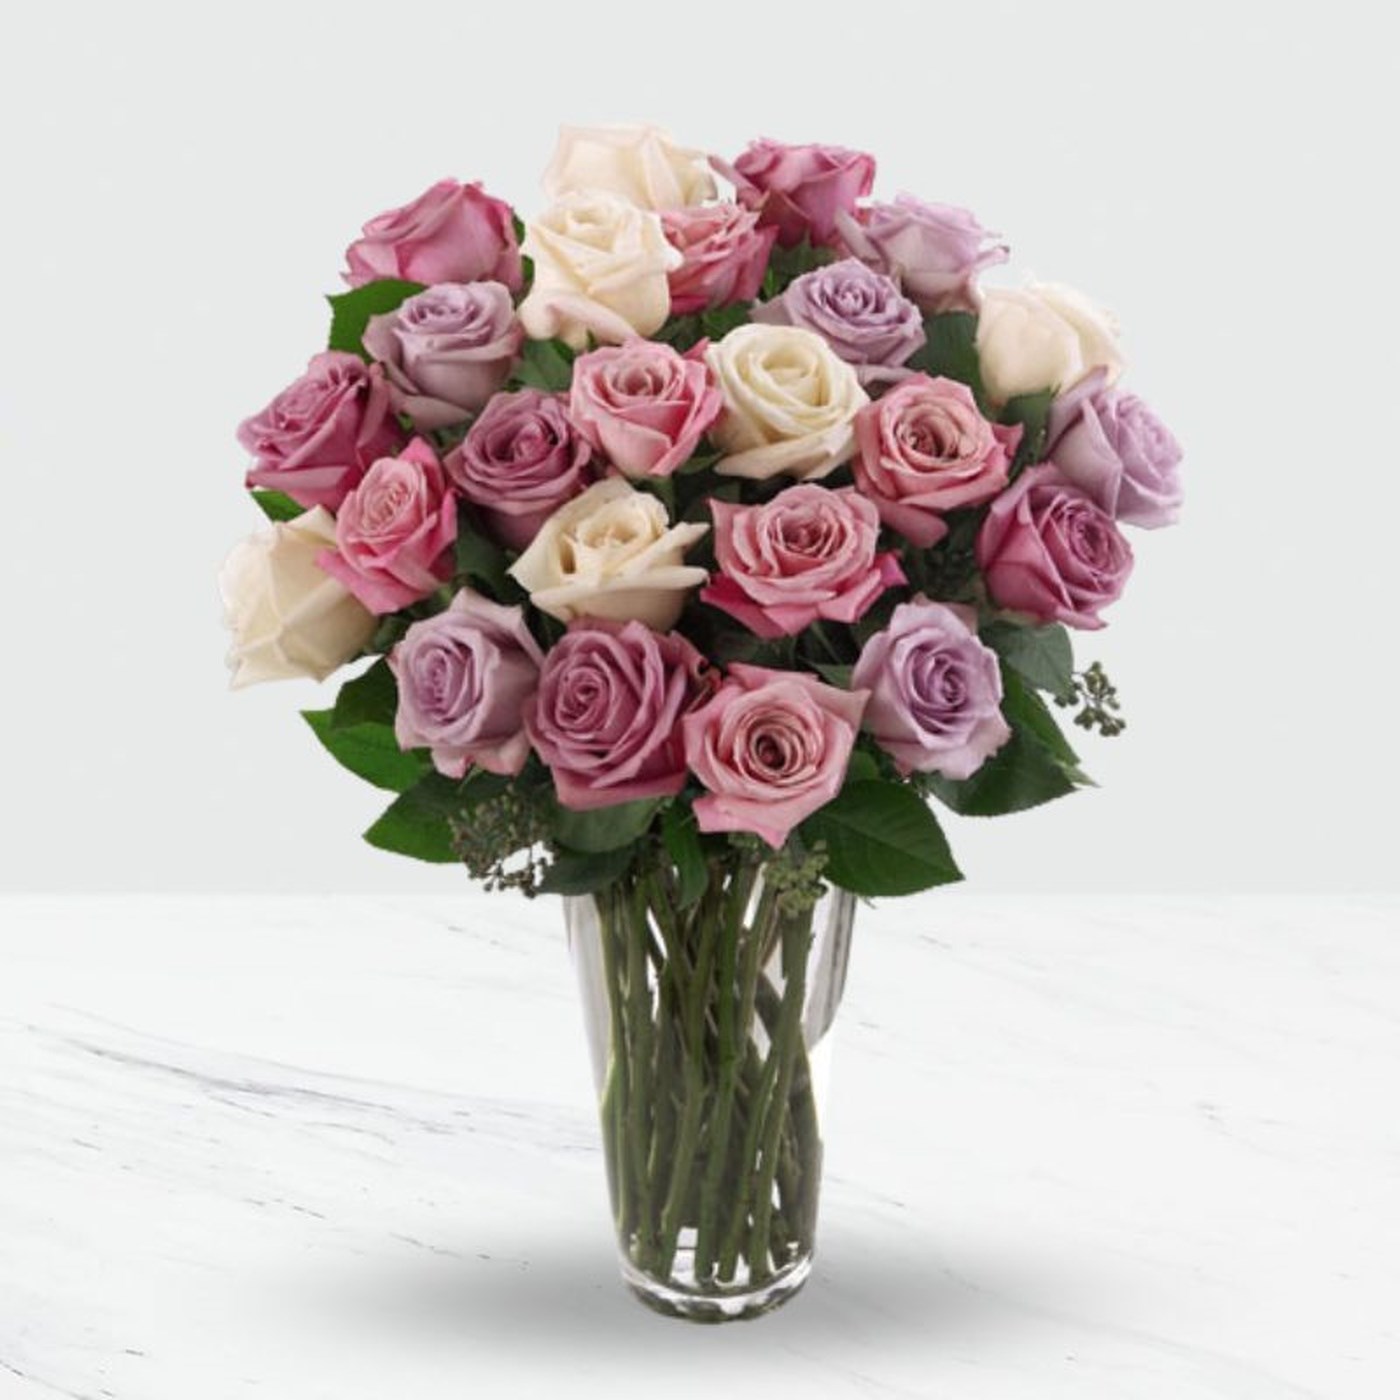 product image for 24 pink and purple roses in a vase.